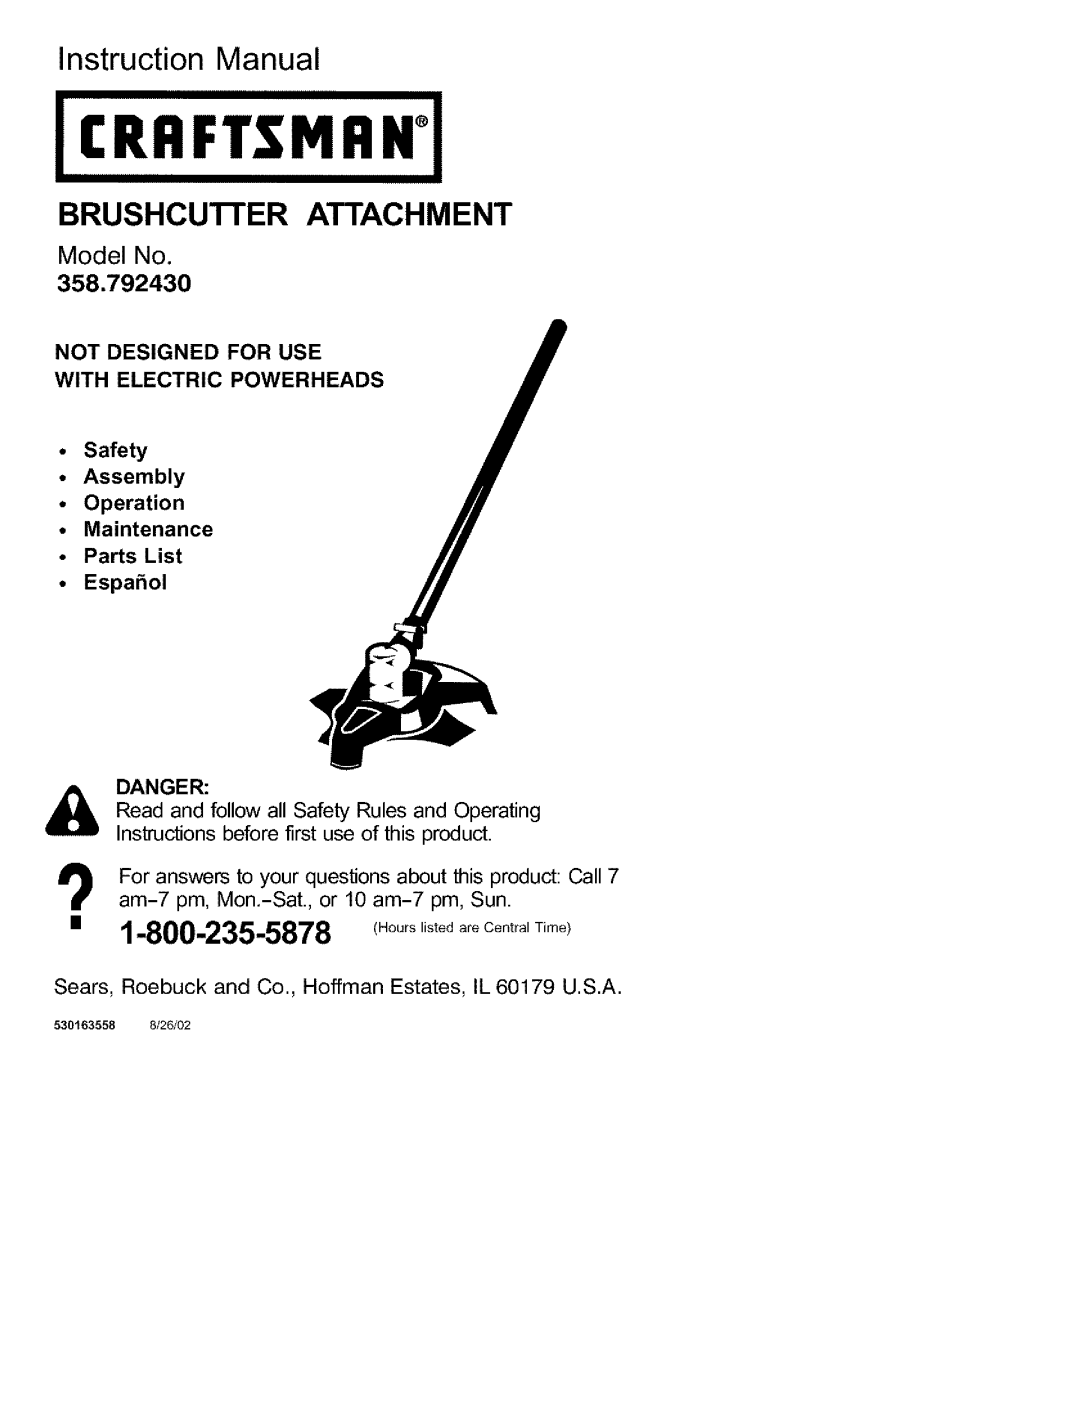 Craftsman 358.792430 instruction manual BRUSHCUnER ATTACHMENT, Model No, Not Designed For Use With Electric Powerheads 